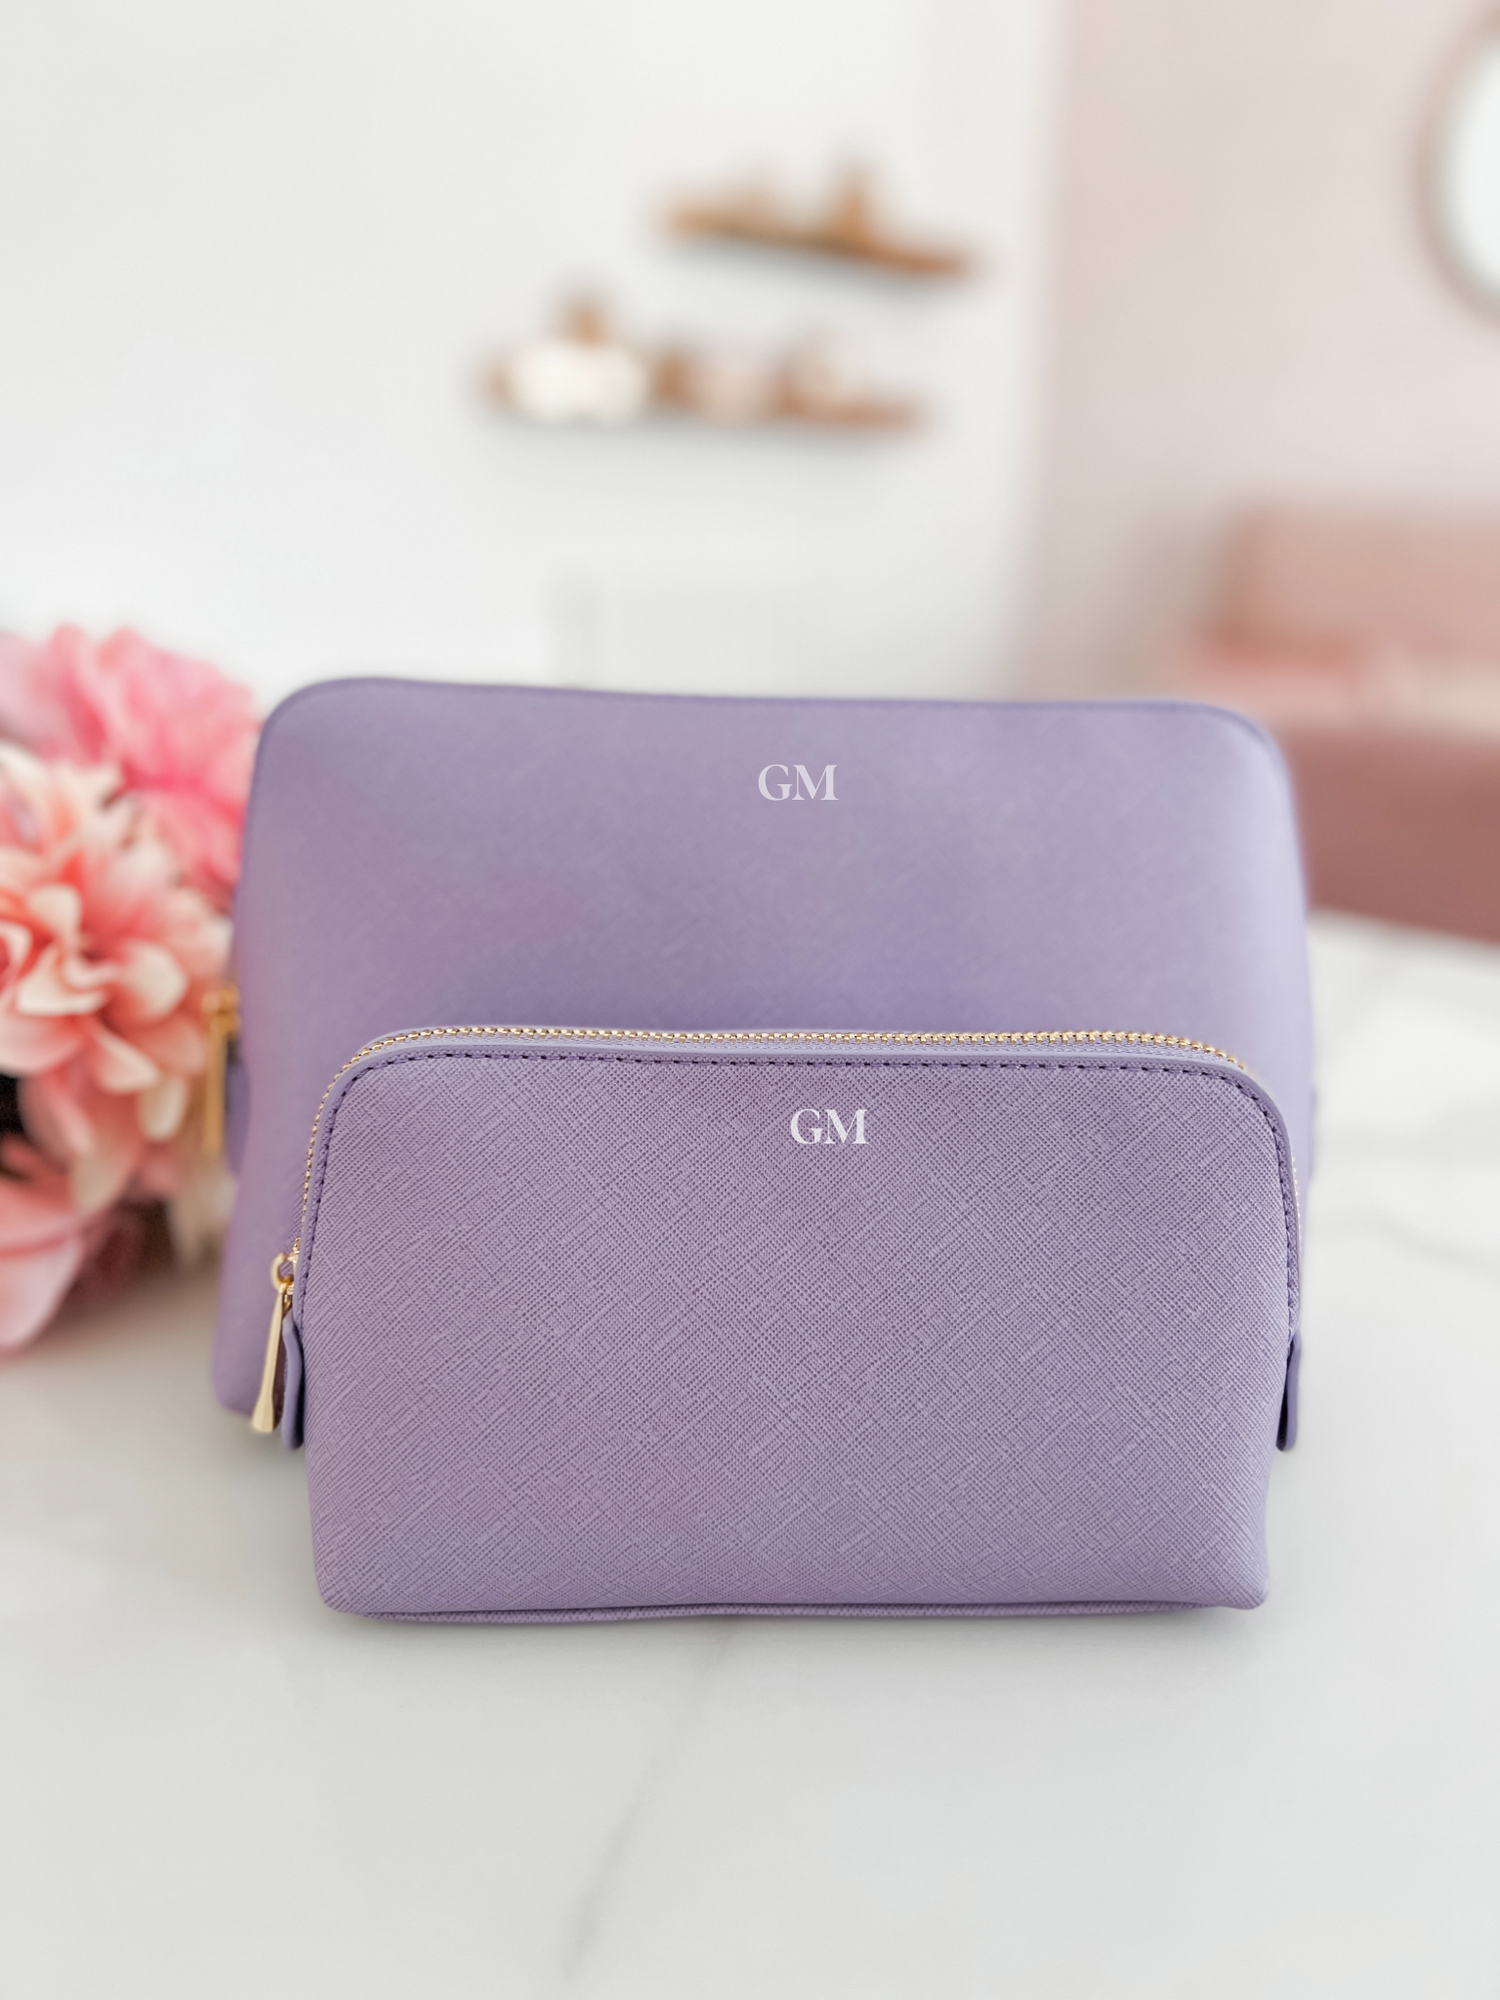 Monogrammed Makeup Bag, Cosmetic Bag with monogram – Pretty Personal Gifts